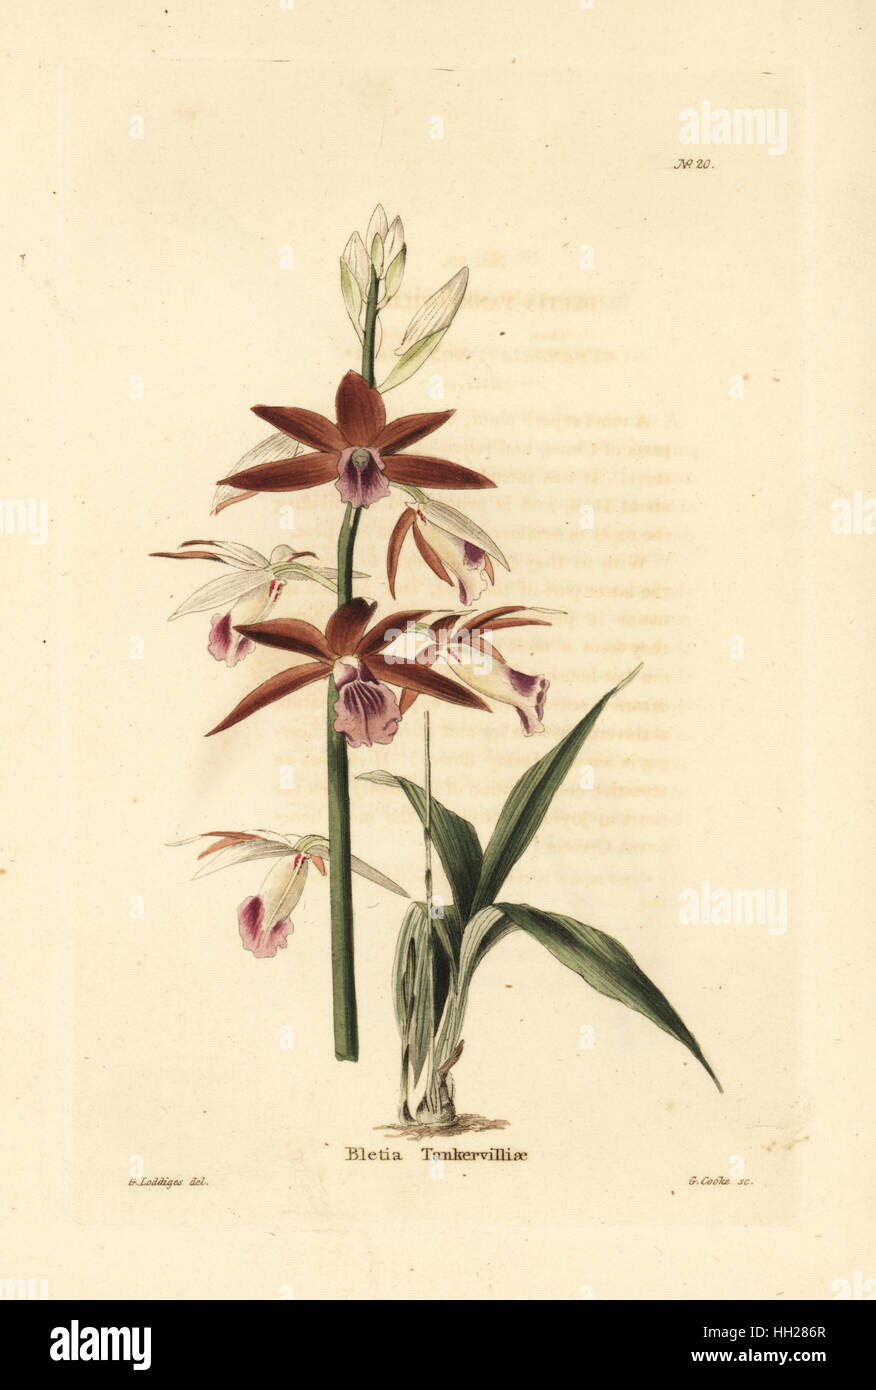 Greater swamp-orchid, Phaius tankervilleae (Bletia tankervilliae). Endangered. Handcoloured copperplate engraving by George Cooke after George Loddiges from Conrad Loddiges' Botanical Cabinet, Hackney, 1817. Stock Photo